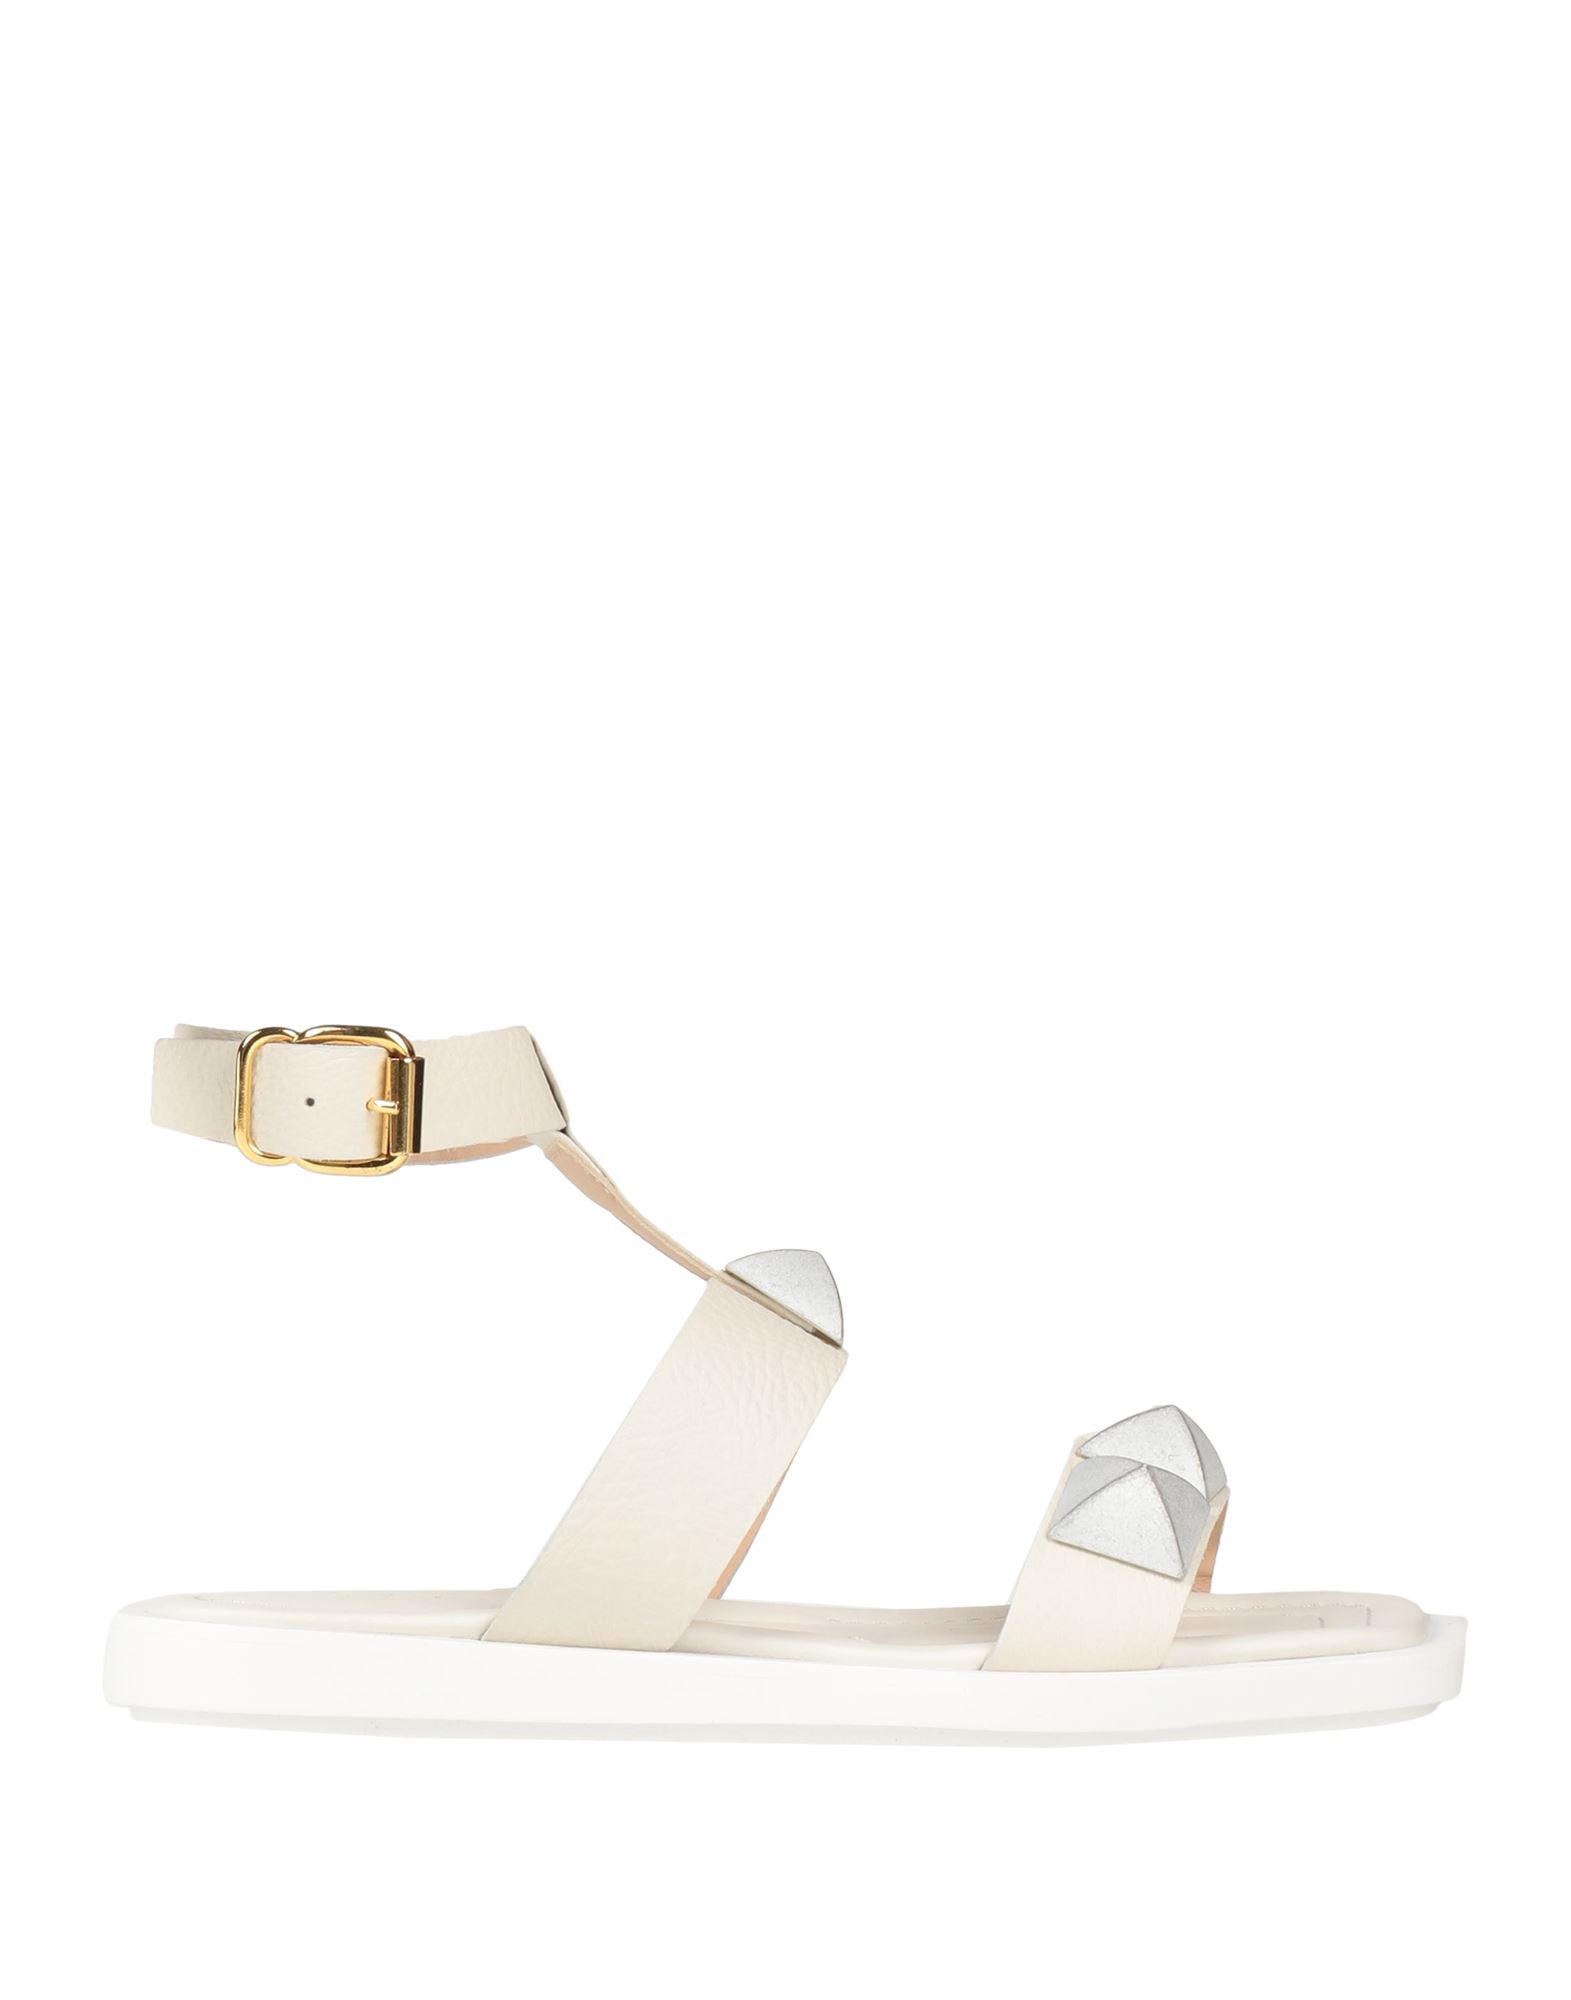 Janet & Janet Woman Sandals Off White Size 8 Soft Leather